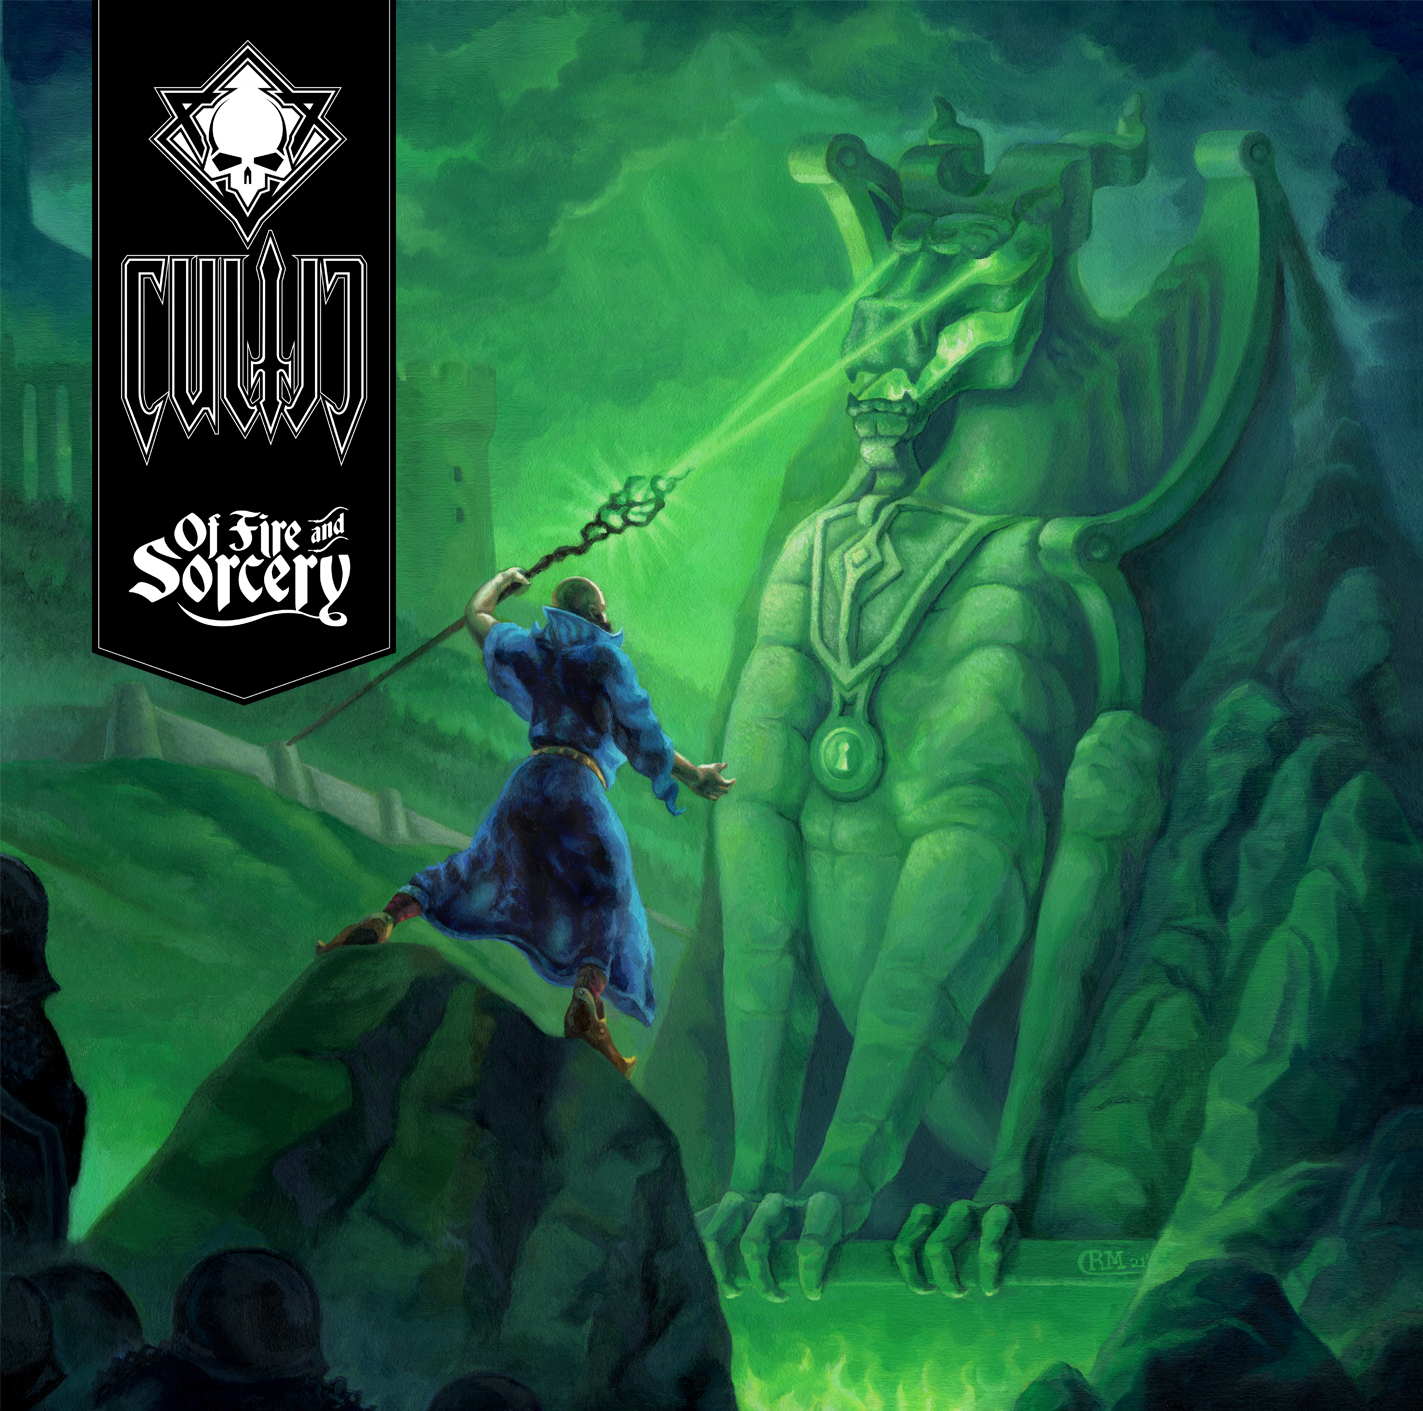 Cultic - Of Fire and Sorcery Album Cover Design